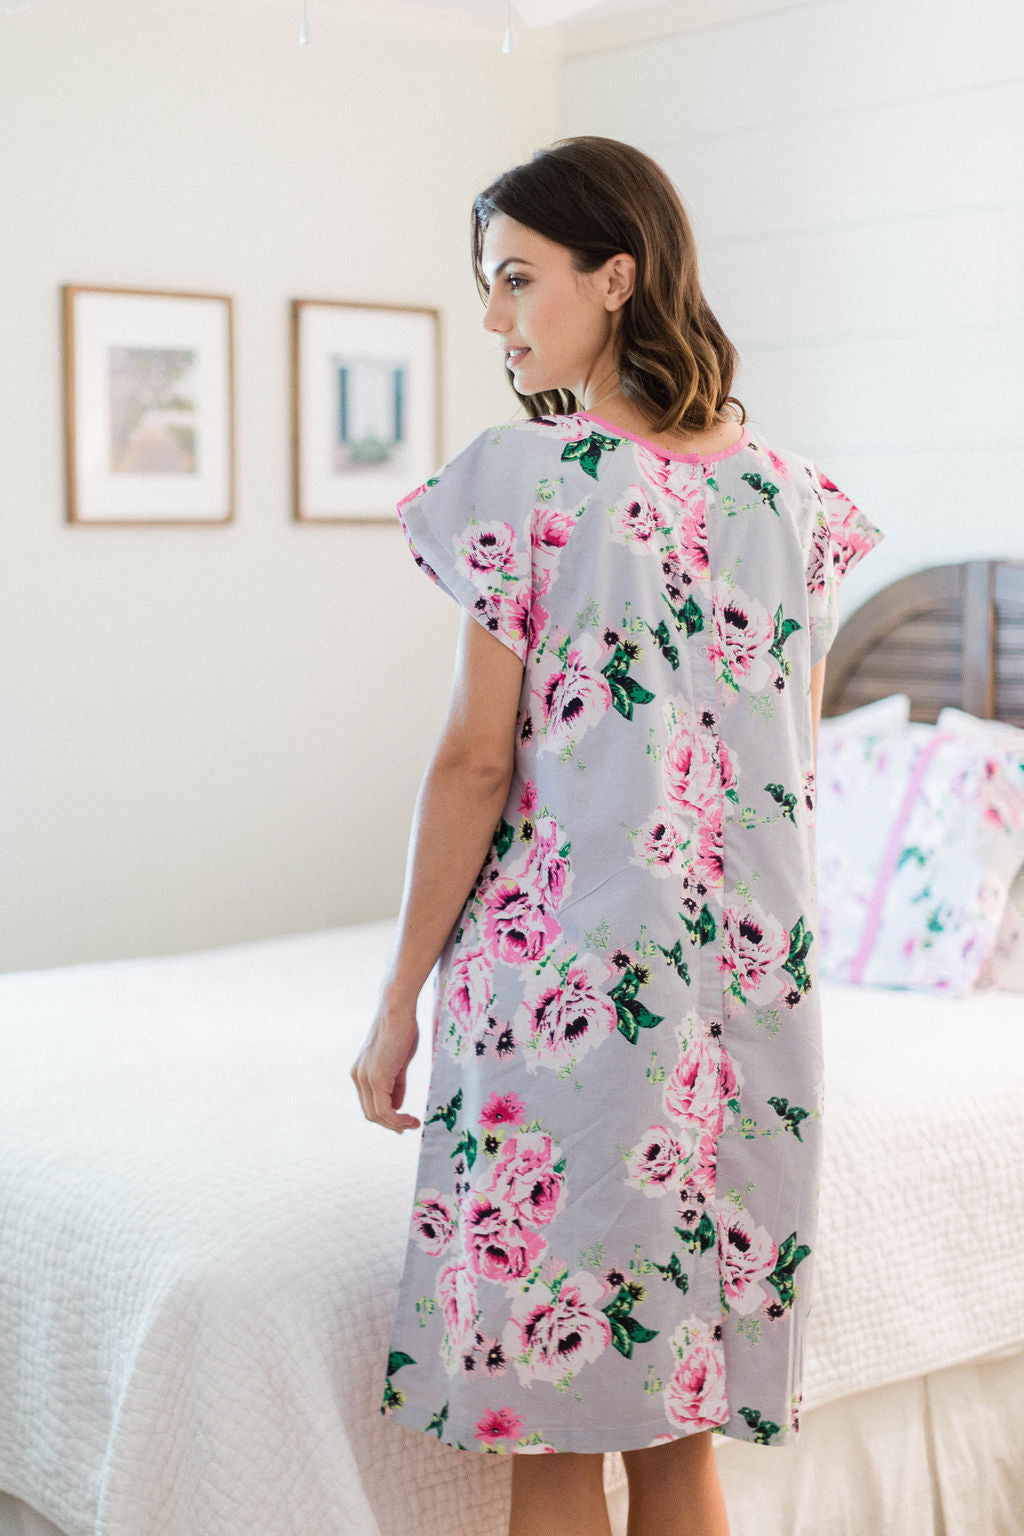 Olivia Patient Hospital Gown Gownies